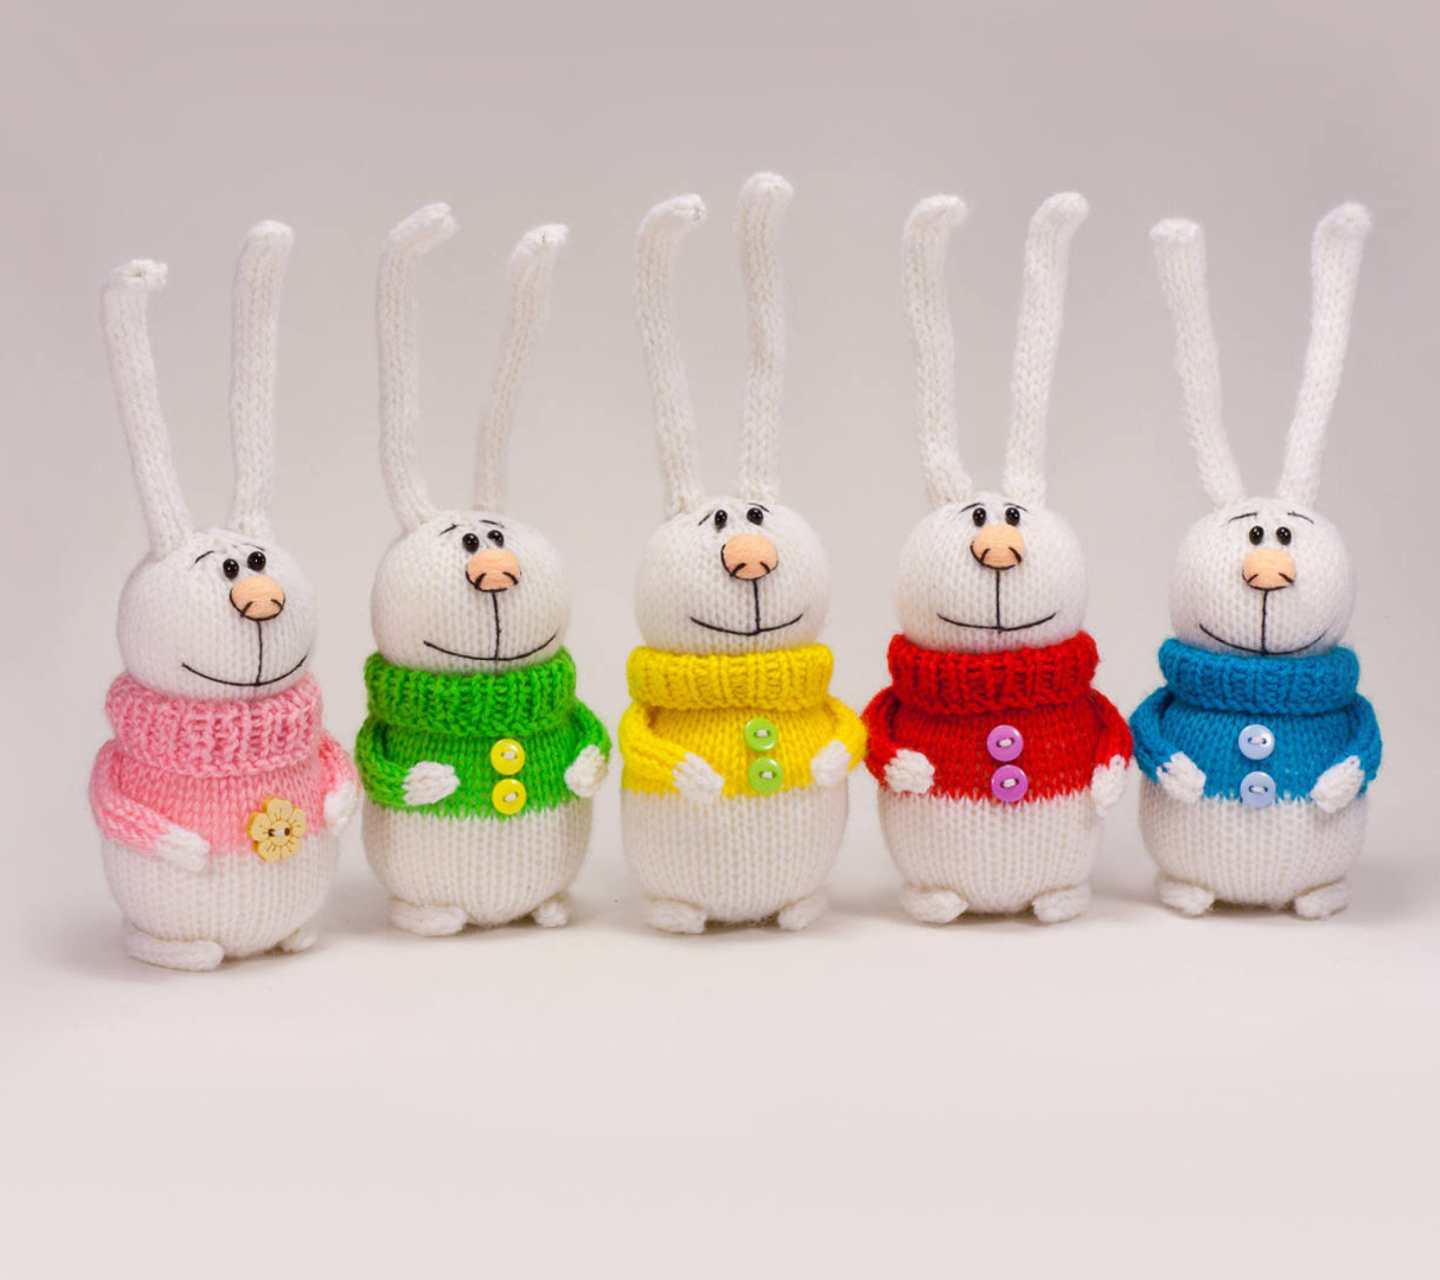 Das Knitted Bunnies In Colorful Sweaters Wallpaper 1440x1280